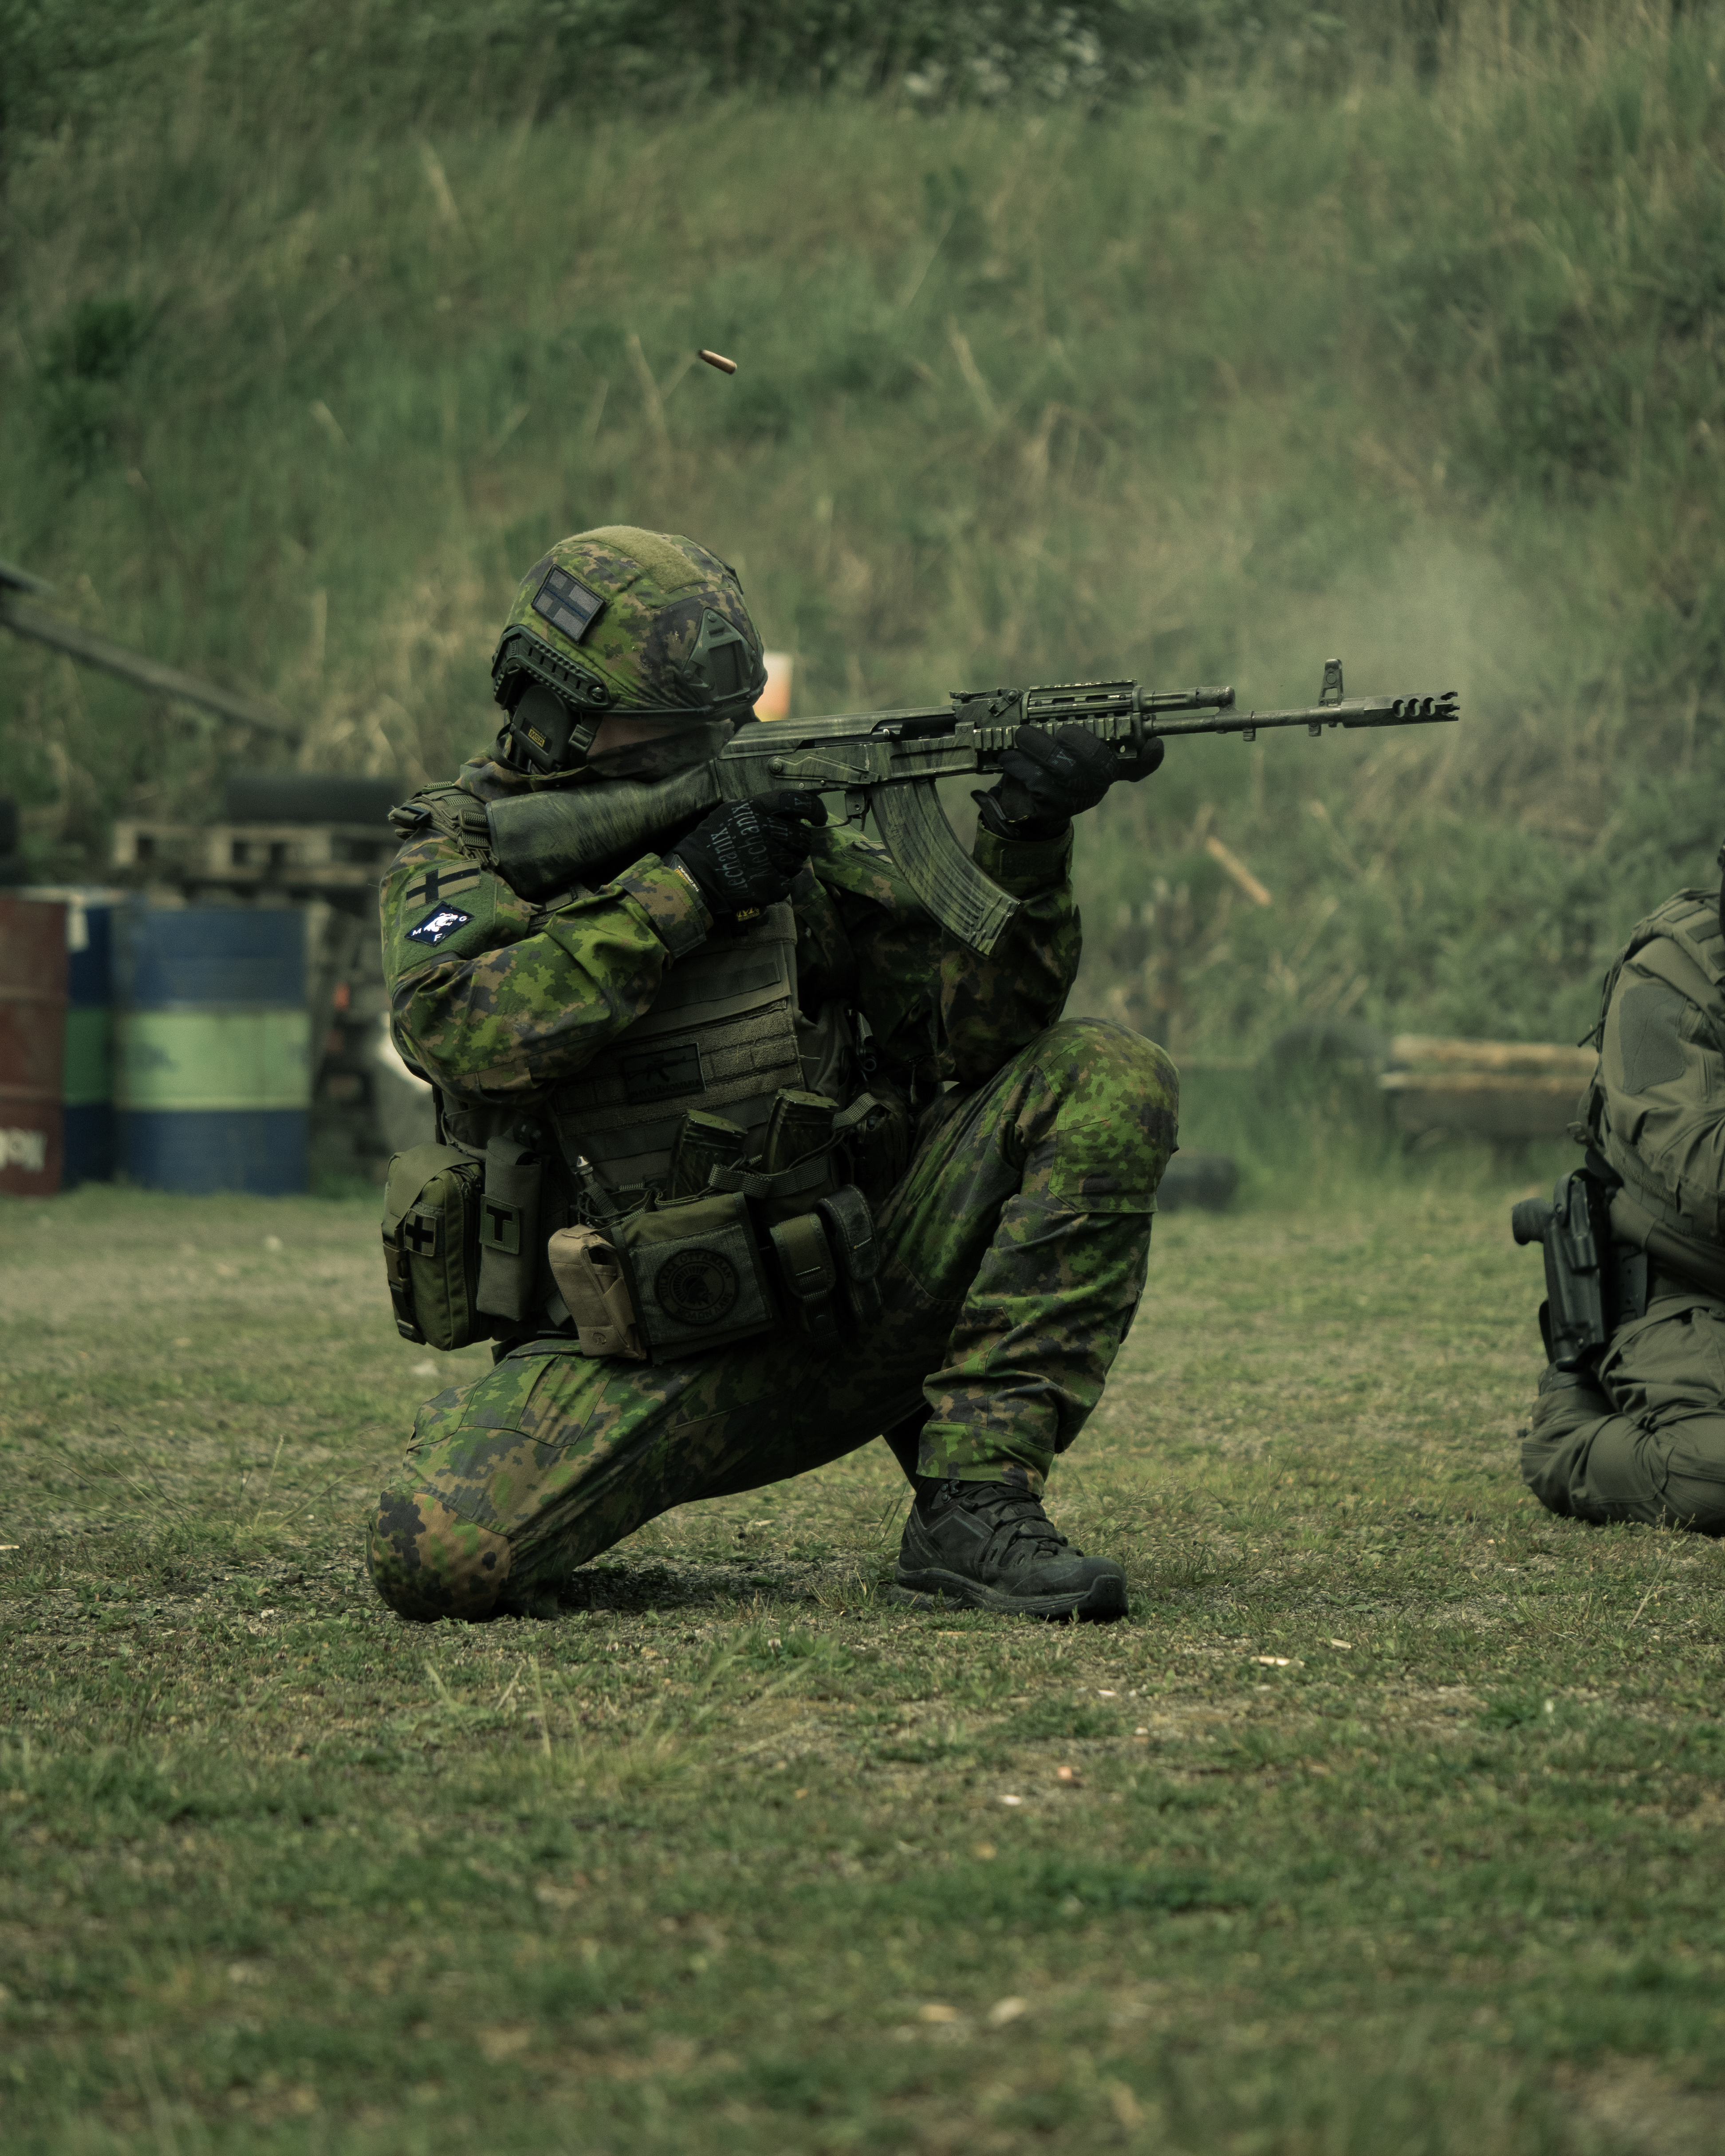 Man is kneeling with rifle on a gun range. Finnish Reservist. He is wearing a M05 camo jacket and M05 combat pants. He has a ballistic helmet. He has a ak-47 rifle. He has a Finnish flag patch and other patches on his arm.